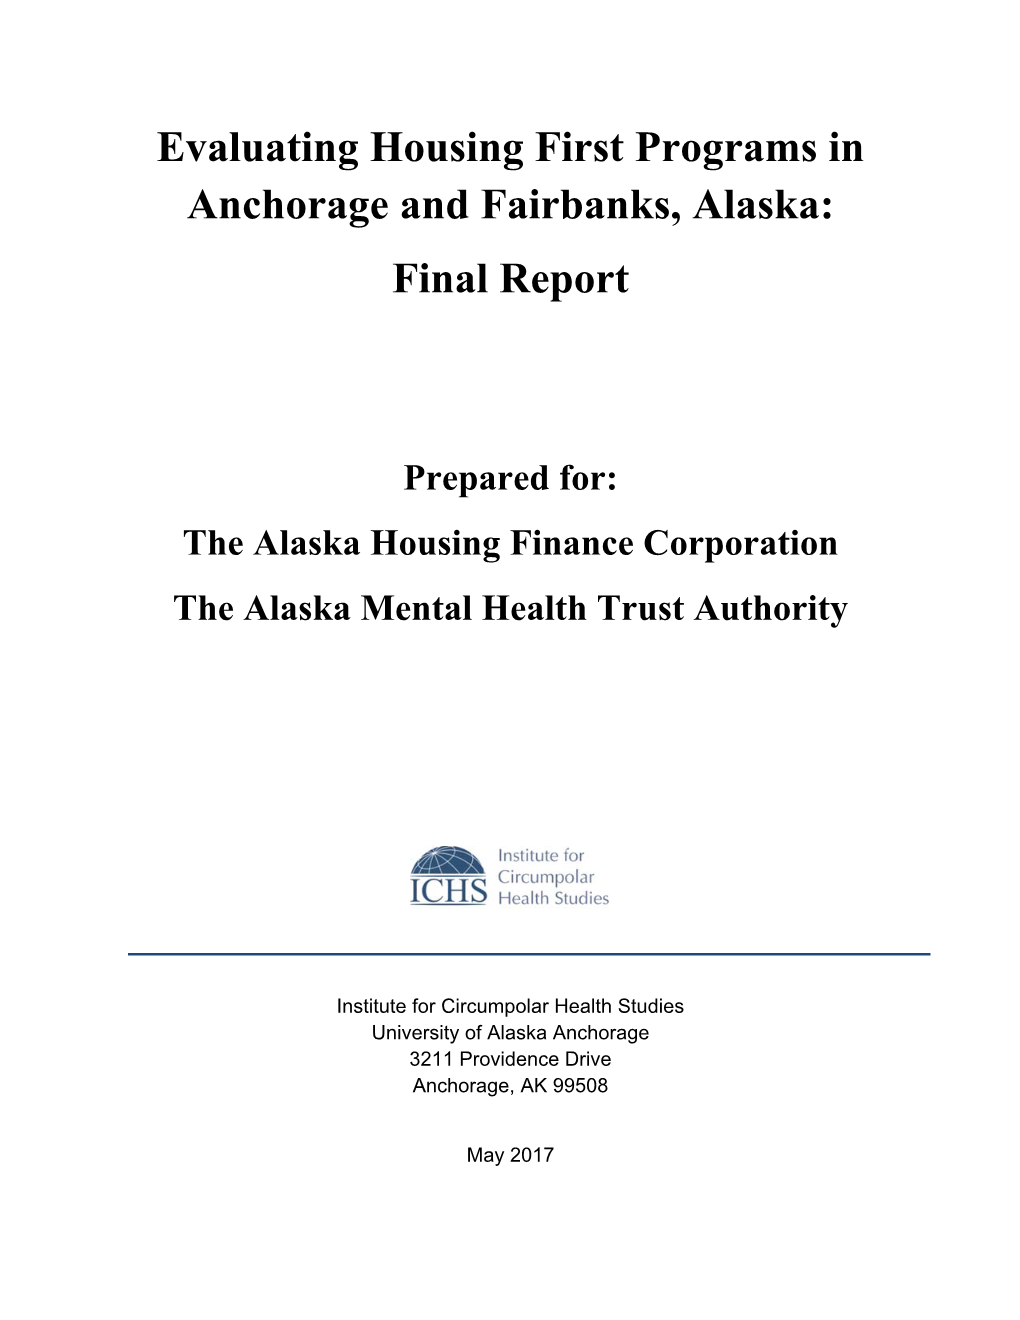 Evaluating Housing First Programs in Anchorage and Fairbanks, Alaska: Final Report